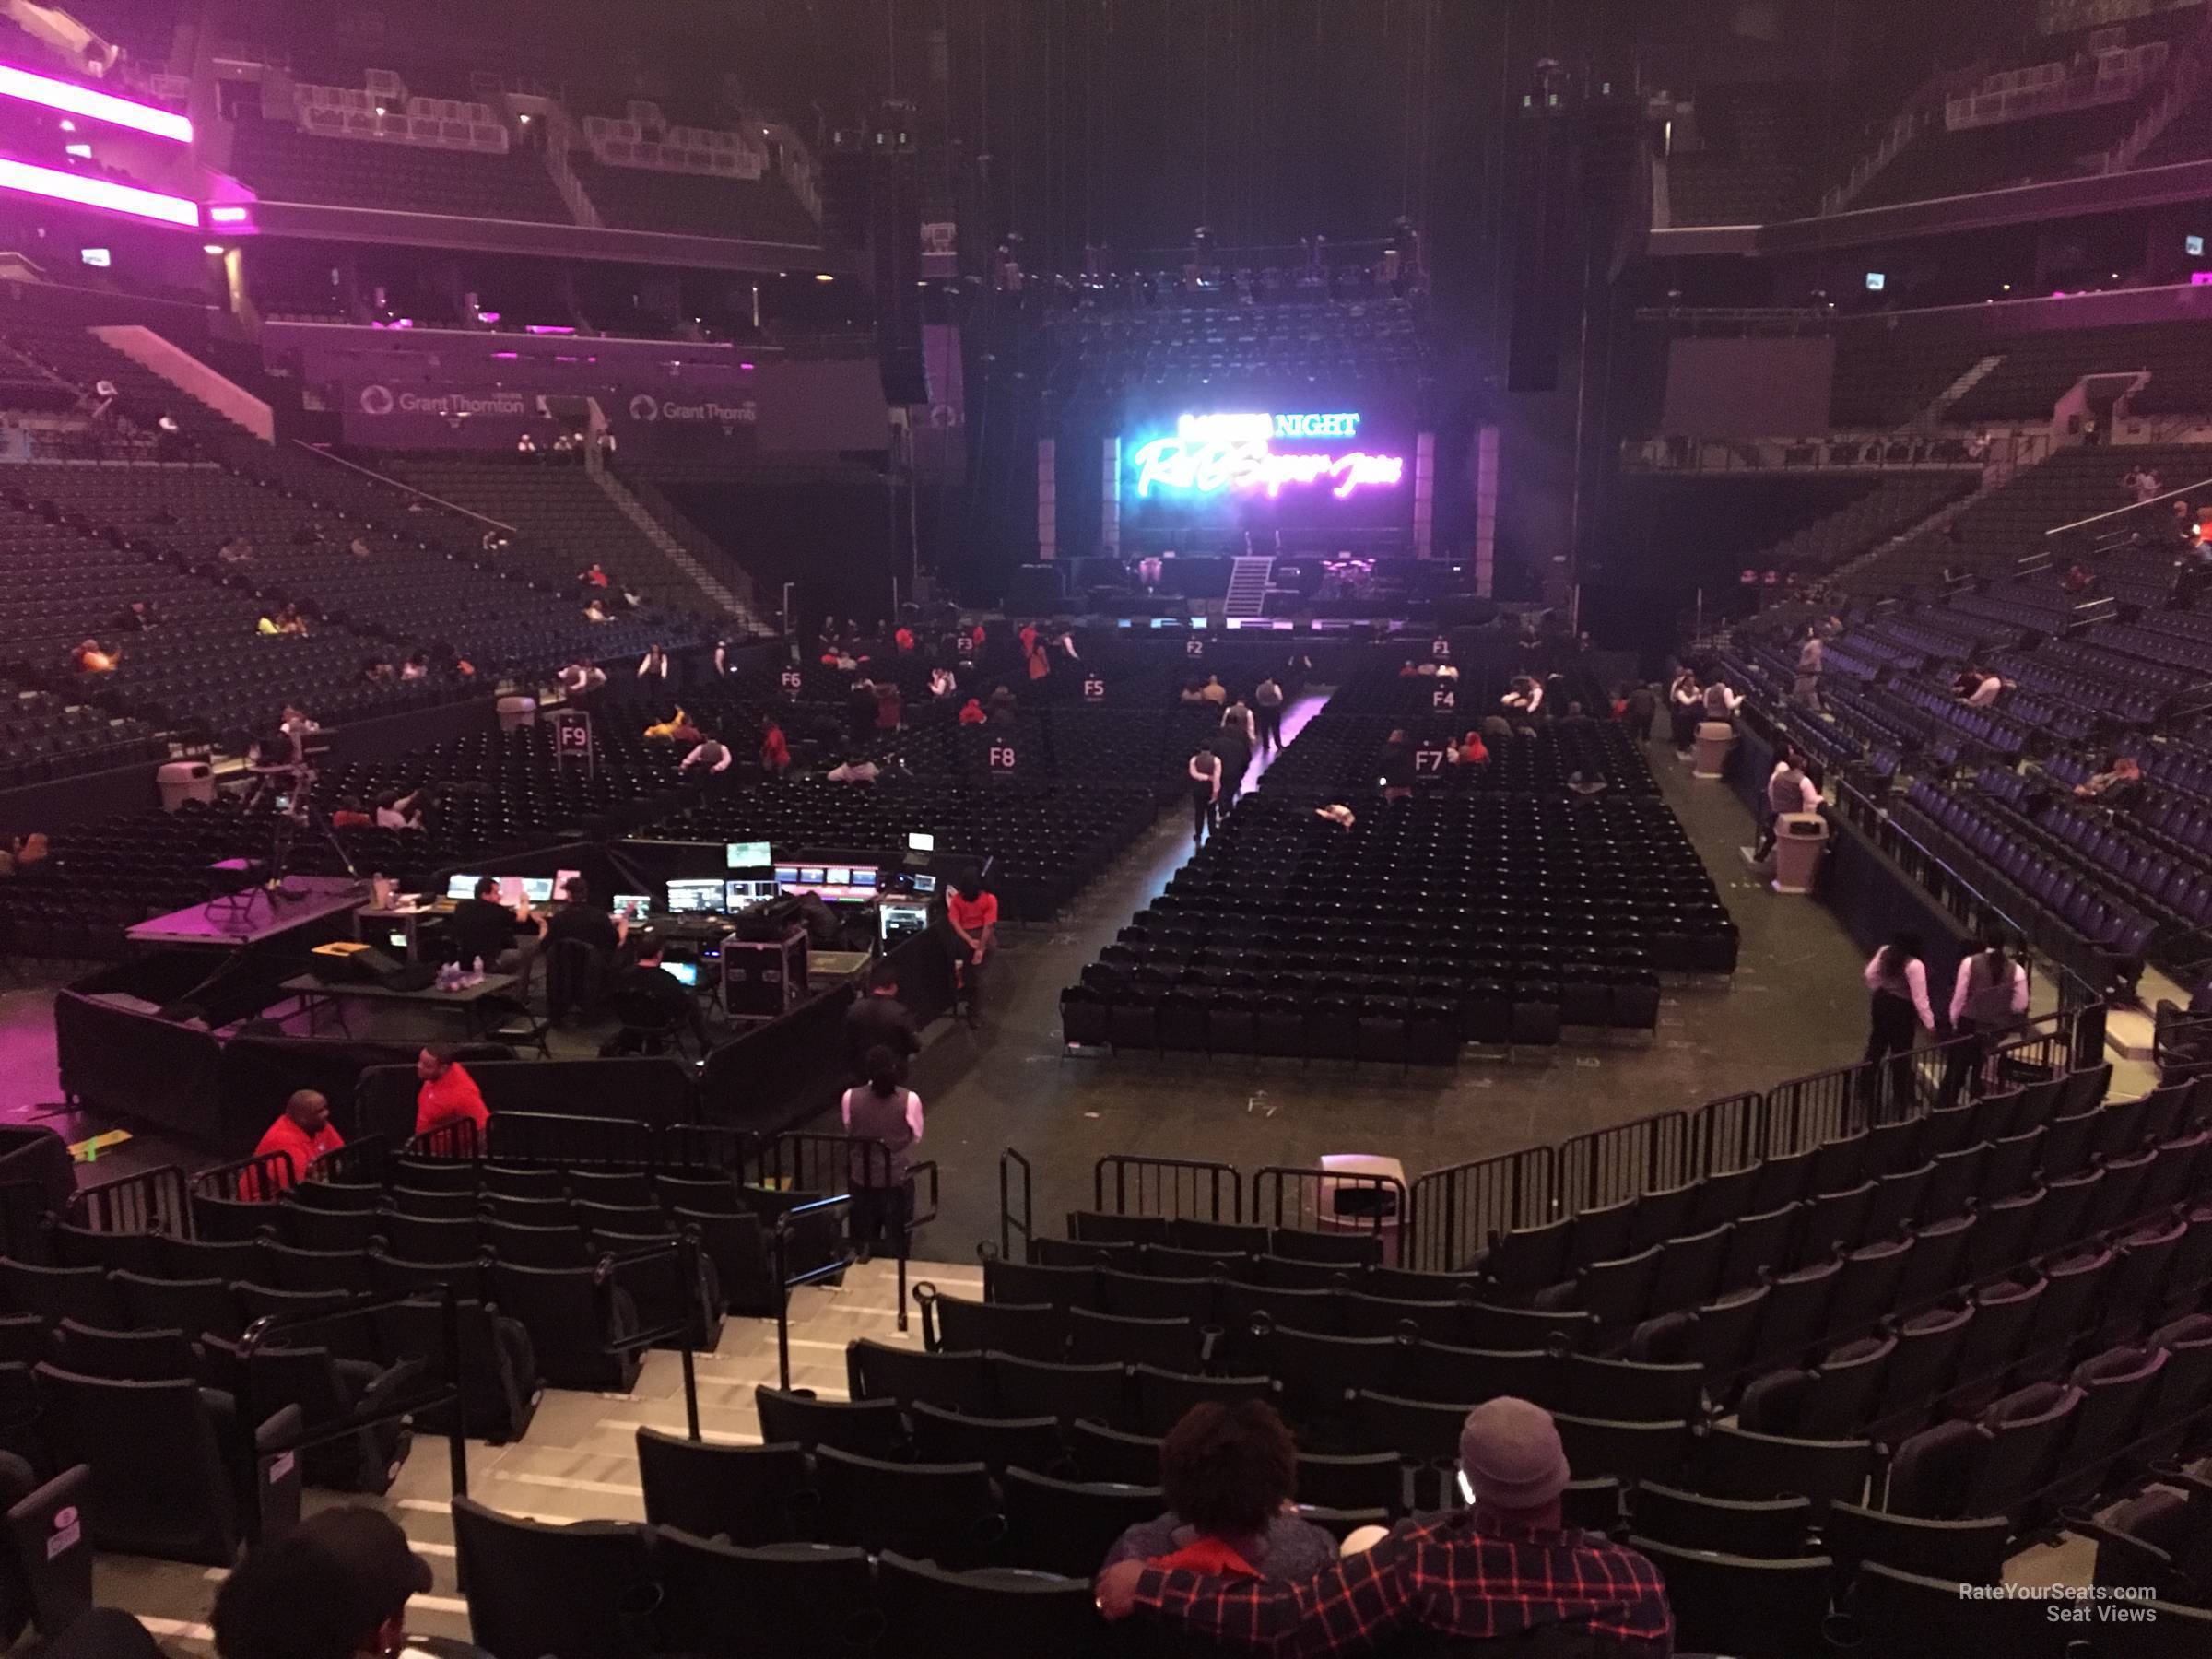 section 15, row 10 seat view  for concert - barclays center